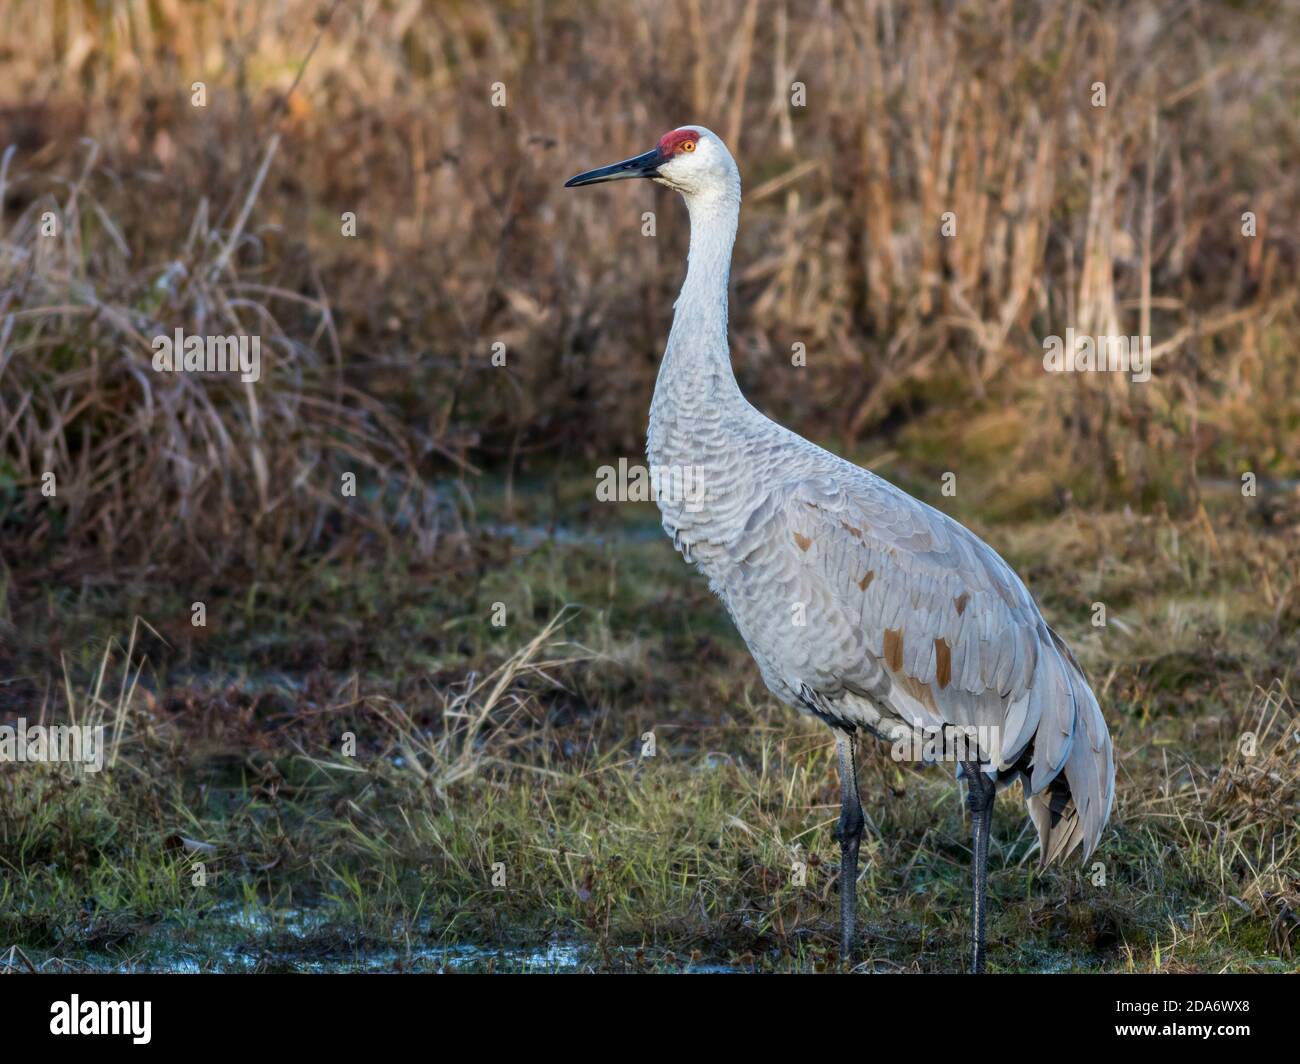 Sandhill Crane, Grus canadensis,  stands tall surrounded by golden grasses in the marsh Stock Photo